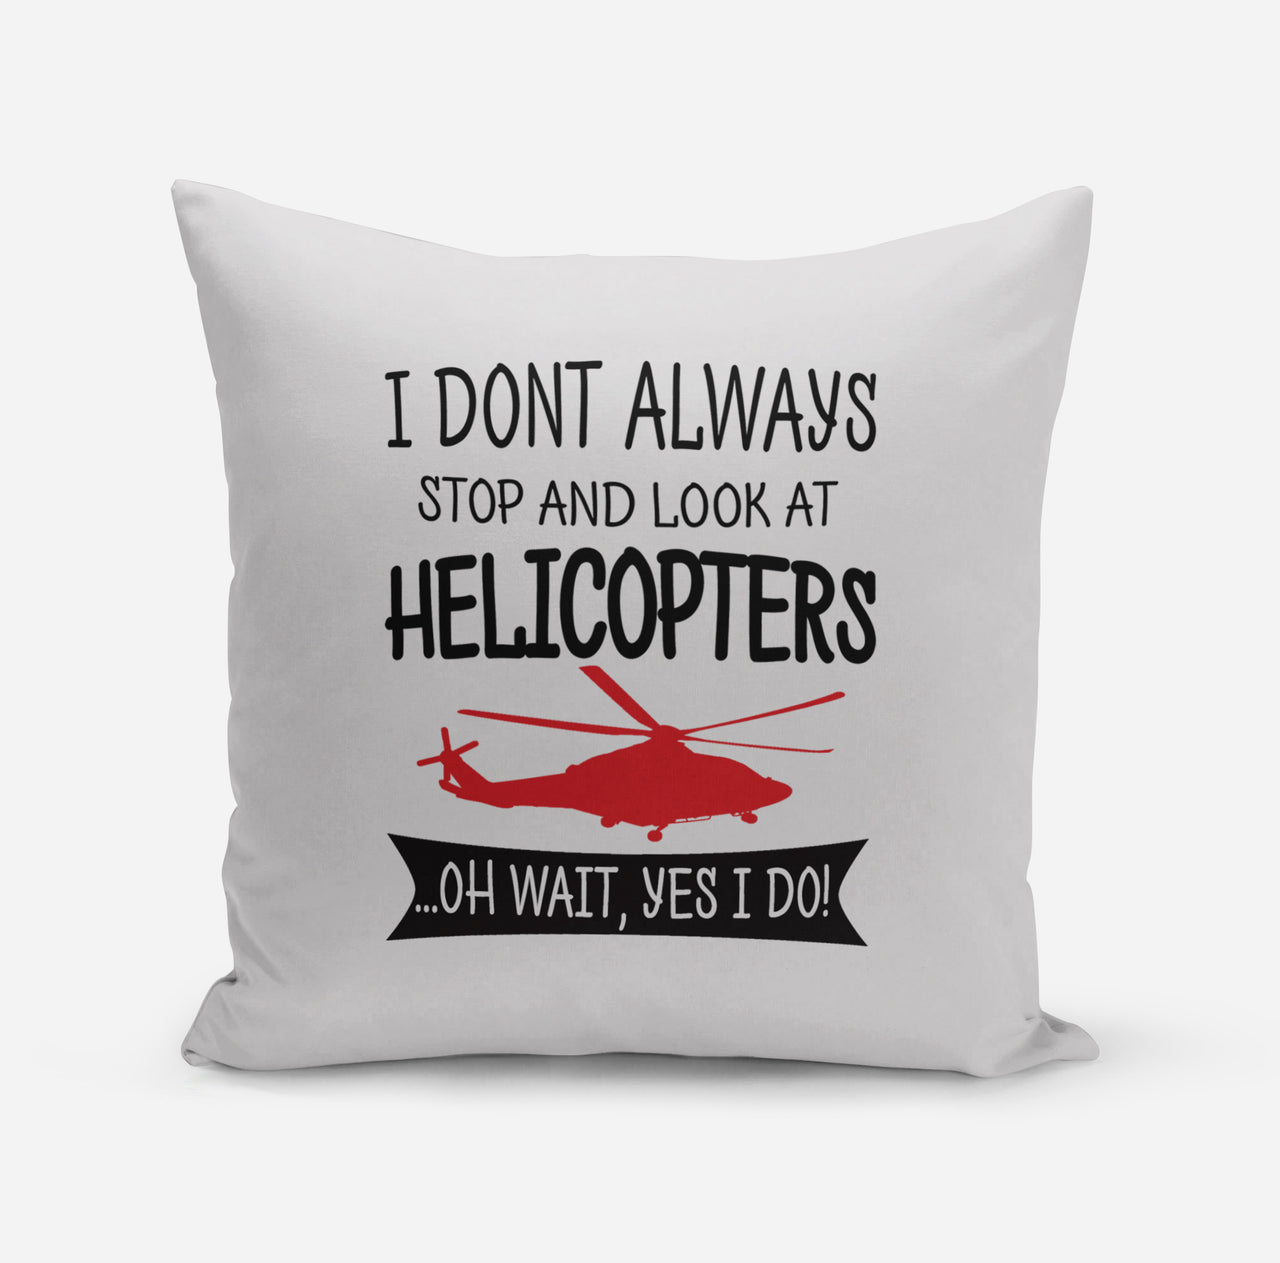 I Don't Always Stop and Look at Helicopters Designed Pillows